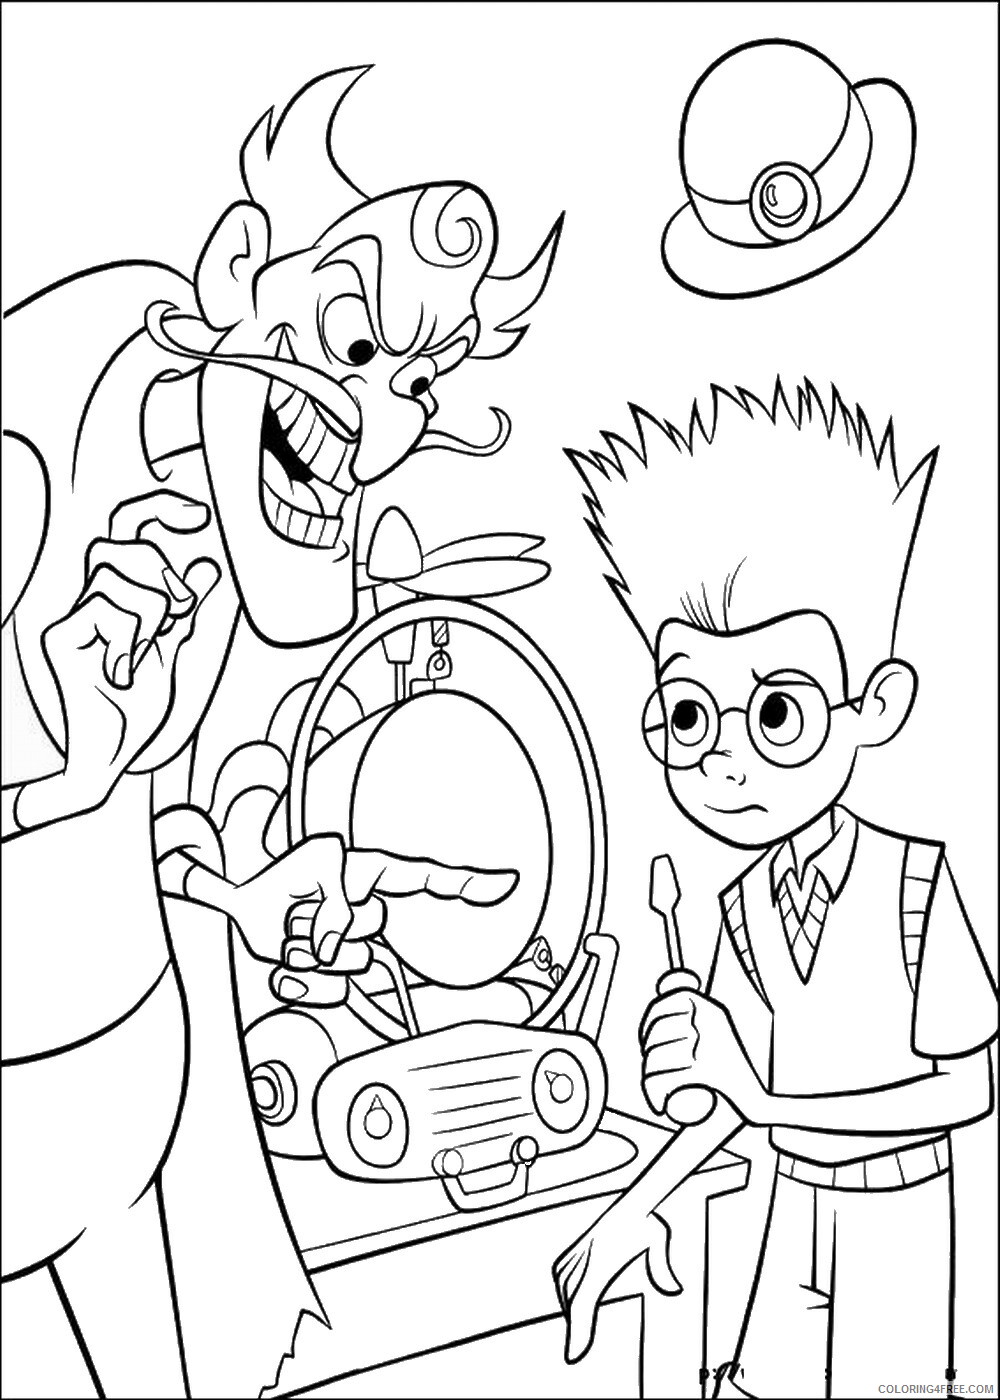 Meet the Robinsons Coloring Pages TV Film Printable 2020 04970 Coloring4free